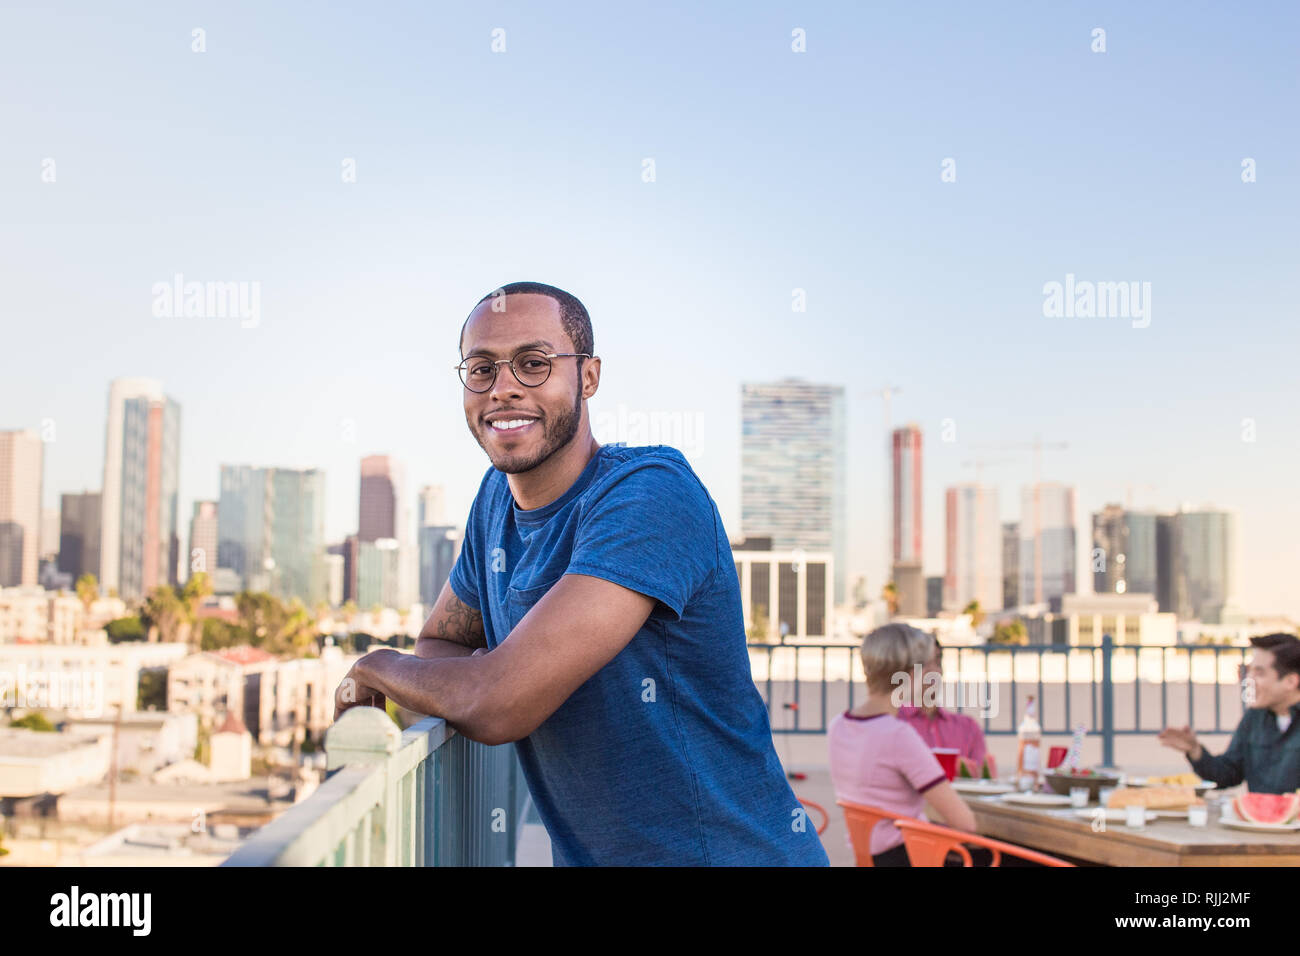 Portrait of young adult male at a rooftop party with city skyline Stock Photo